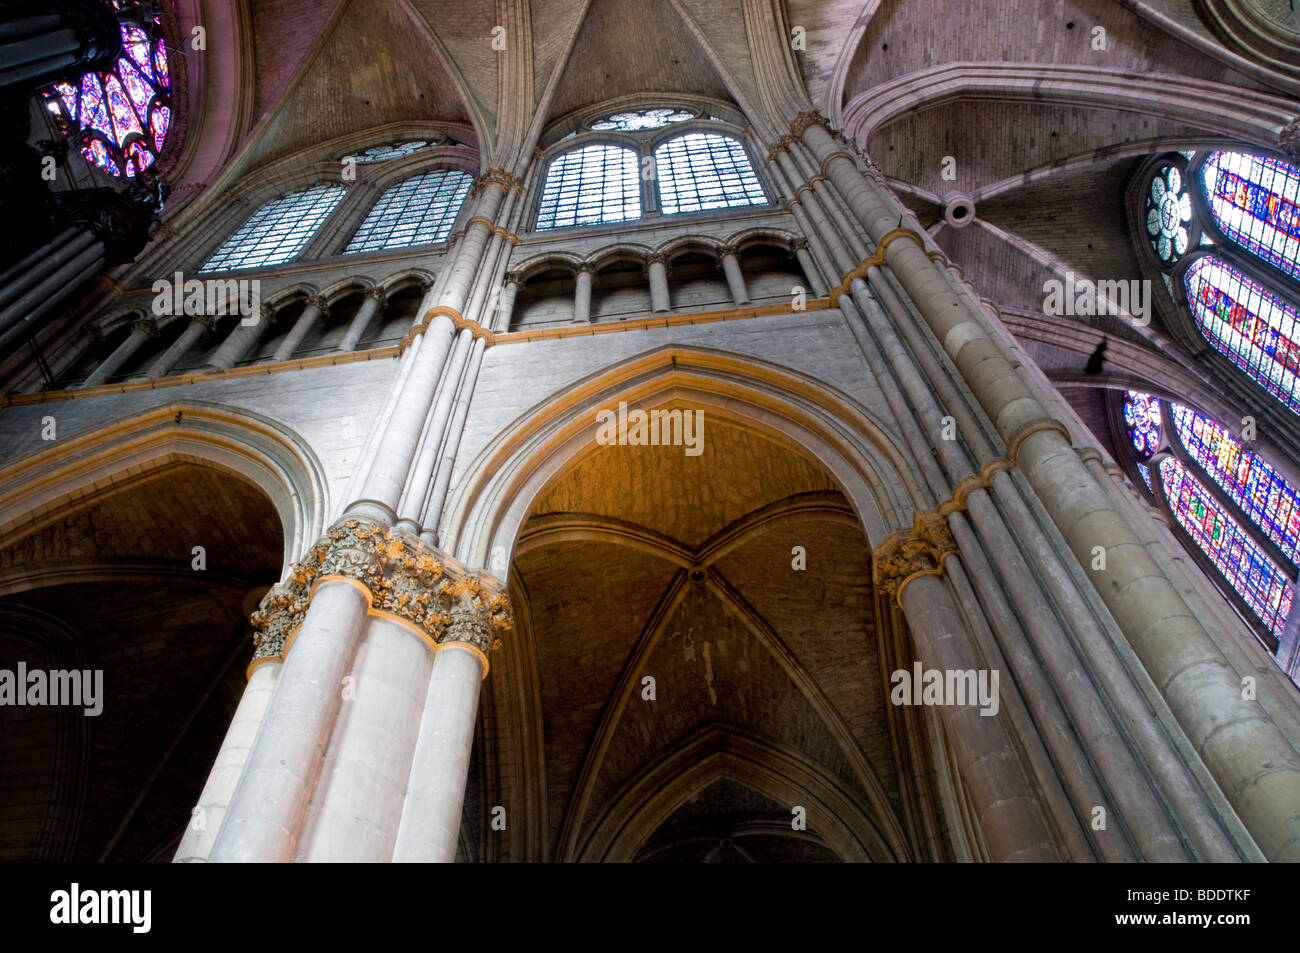 Interior of the Cathedral of Reims, France. Stock Photo